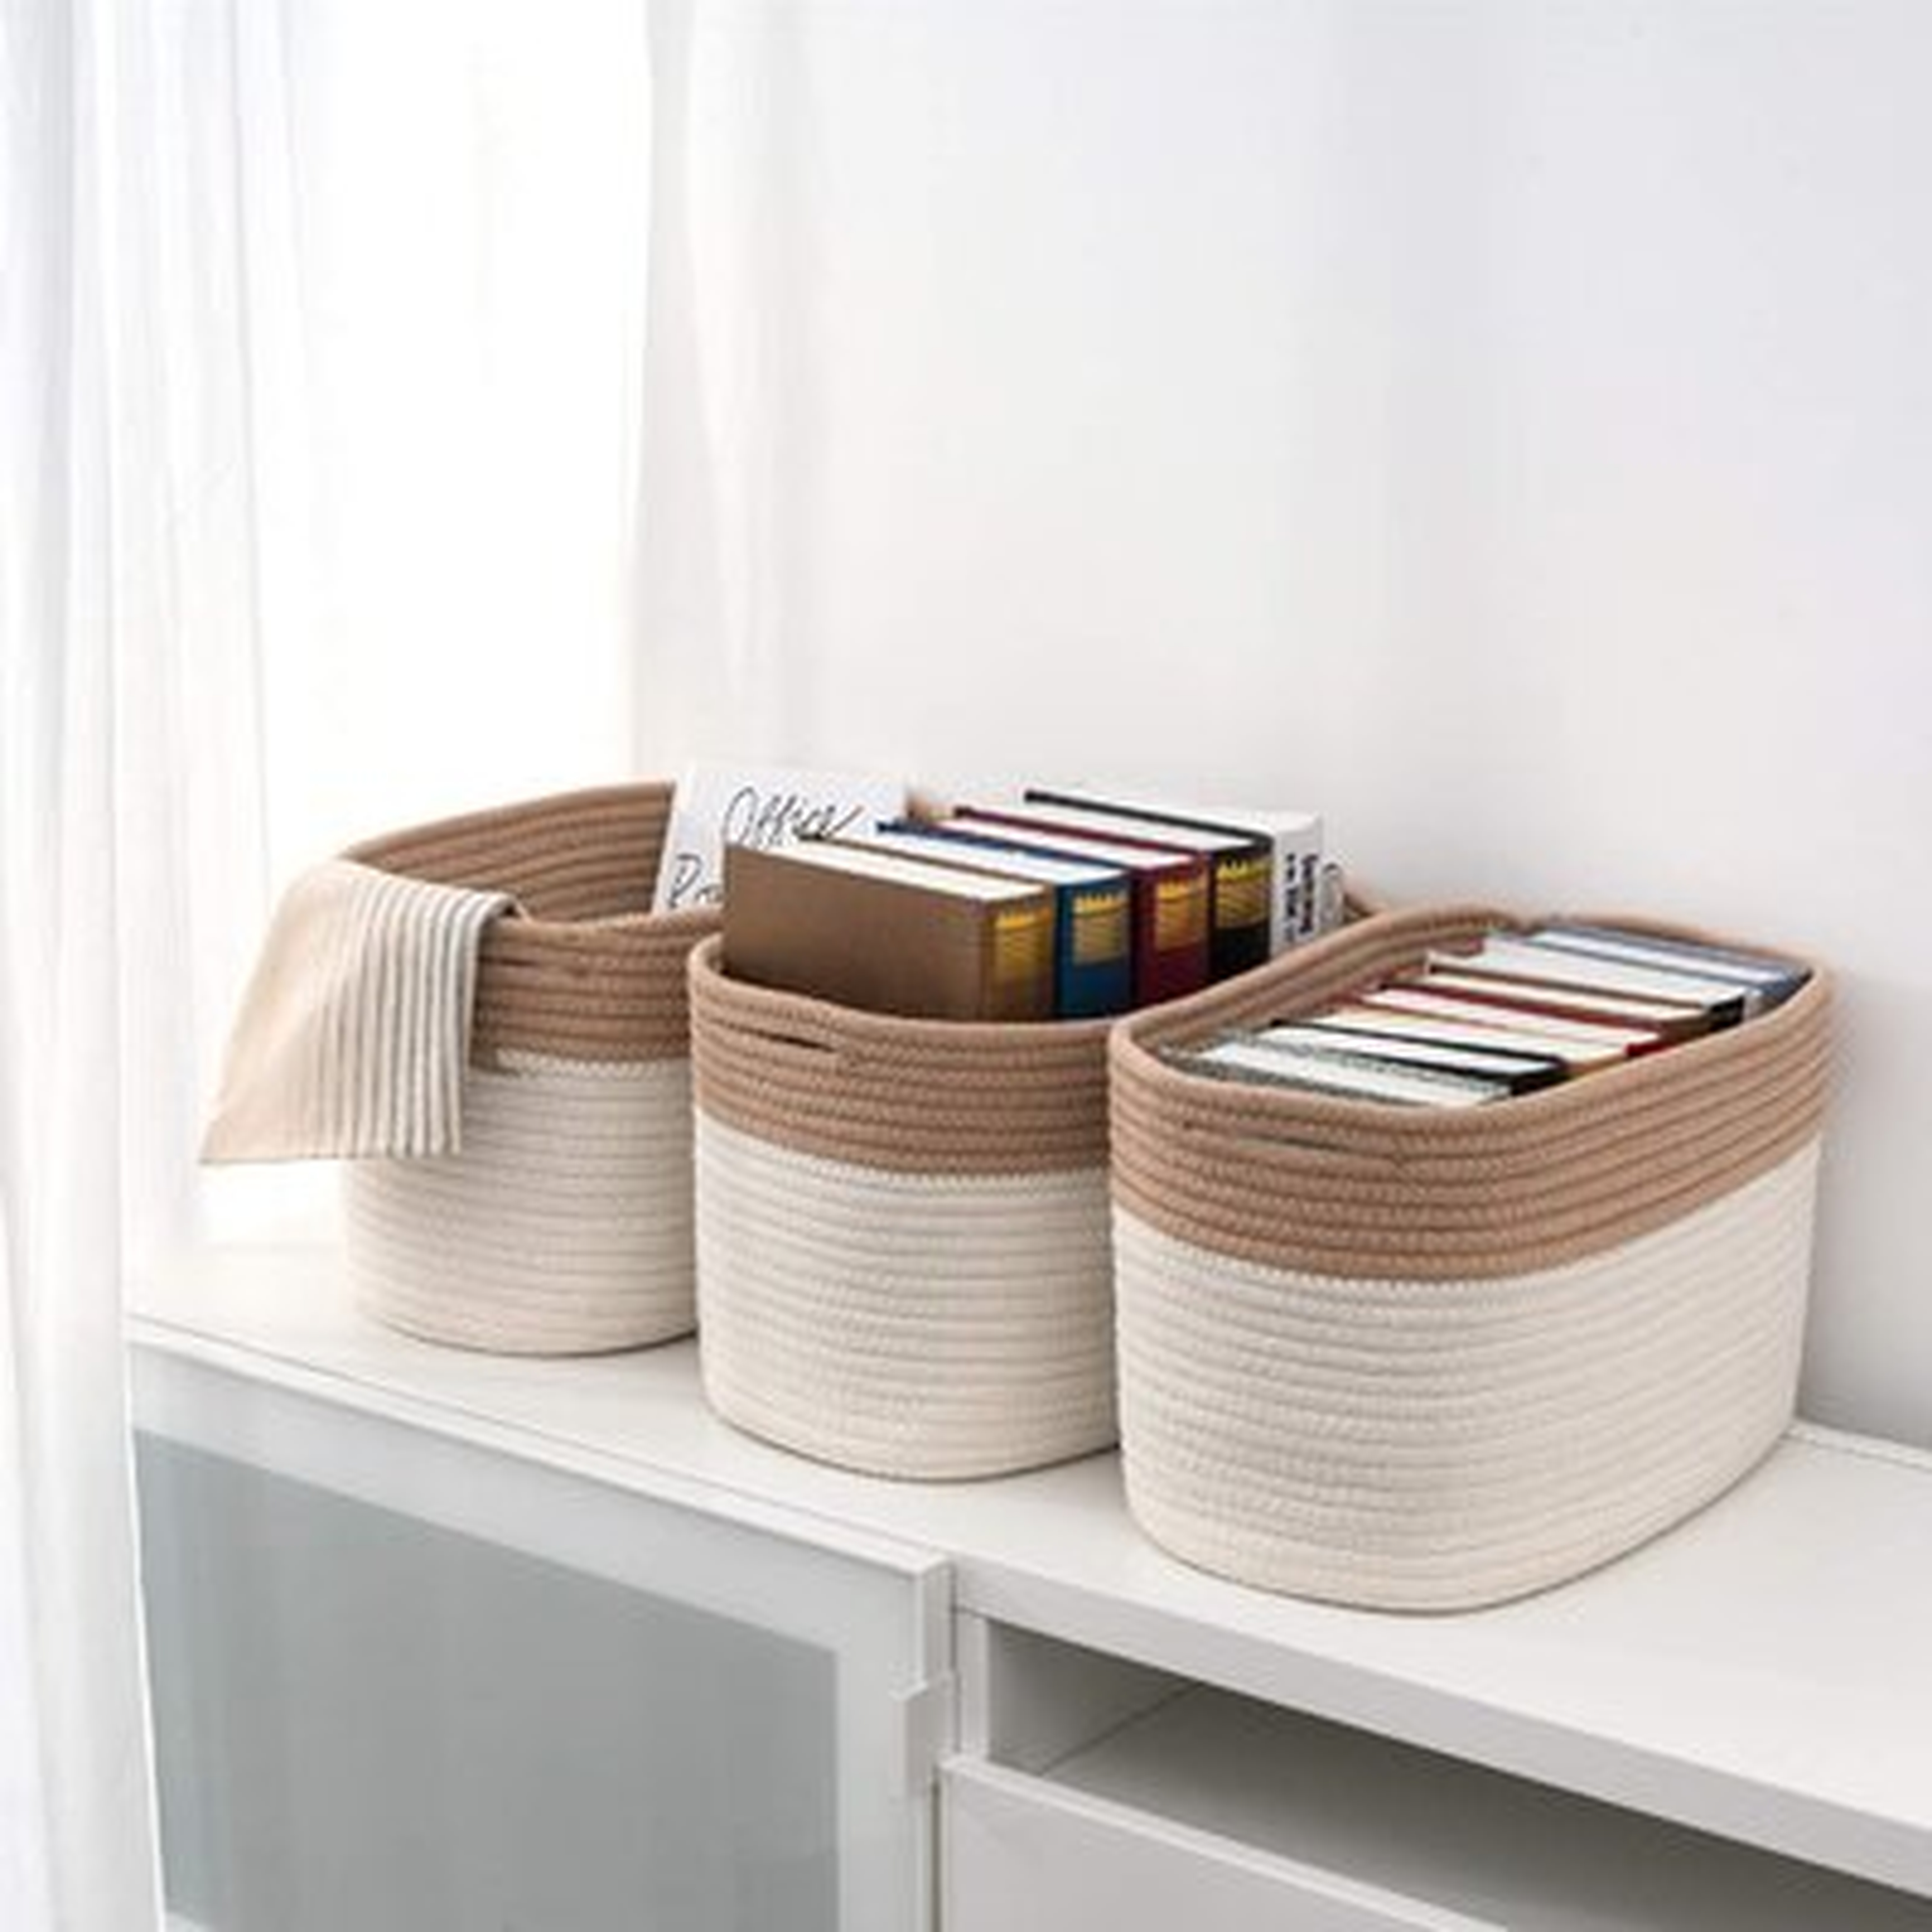 Cotton Rope Storage Baskets Bin Set Of 3 Storage Cube Organizer Foldable Decorative Woven Basket With Handles For Clothes, Toy, Makeup, Books, Towels, Nursery 15"X 10"X 9" - Wayfair